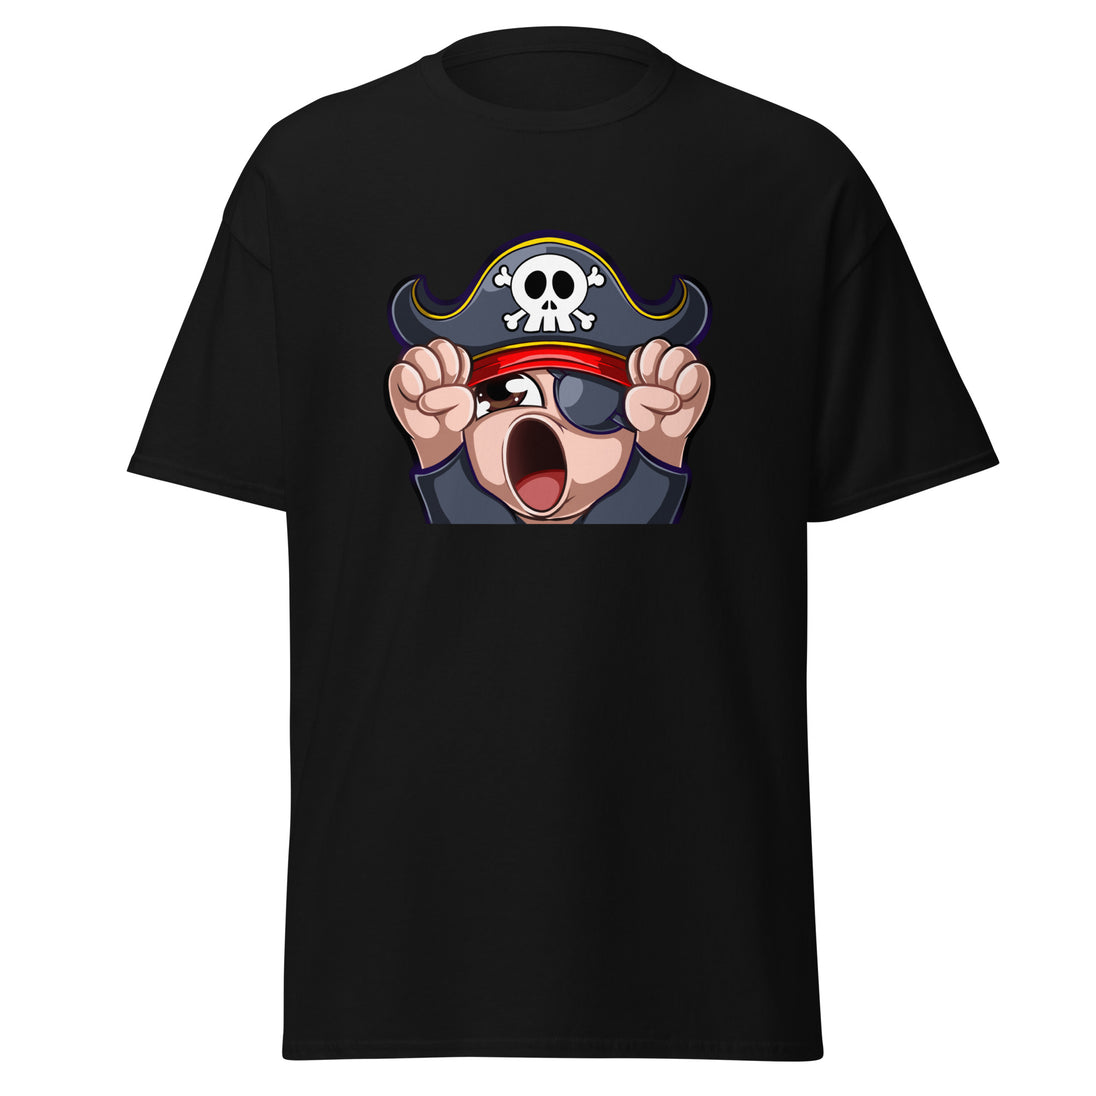 Pirate Hype Gamer's Delight - Twitch-Ready Black T-Shirt for Gamers